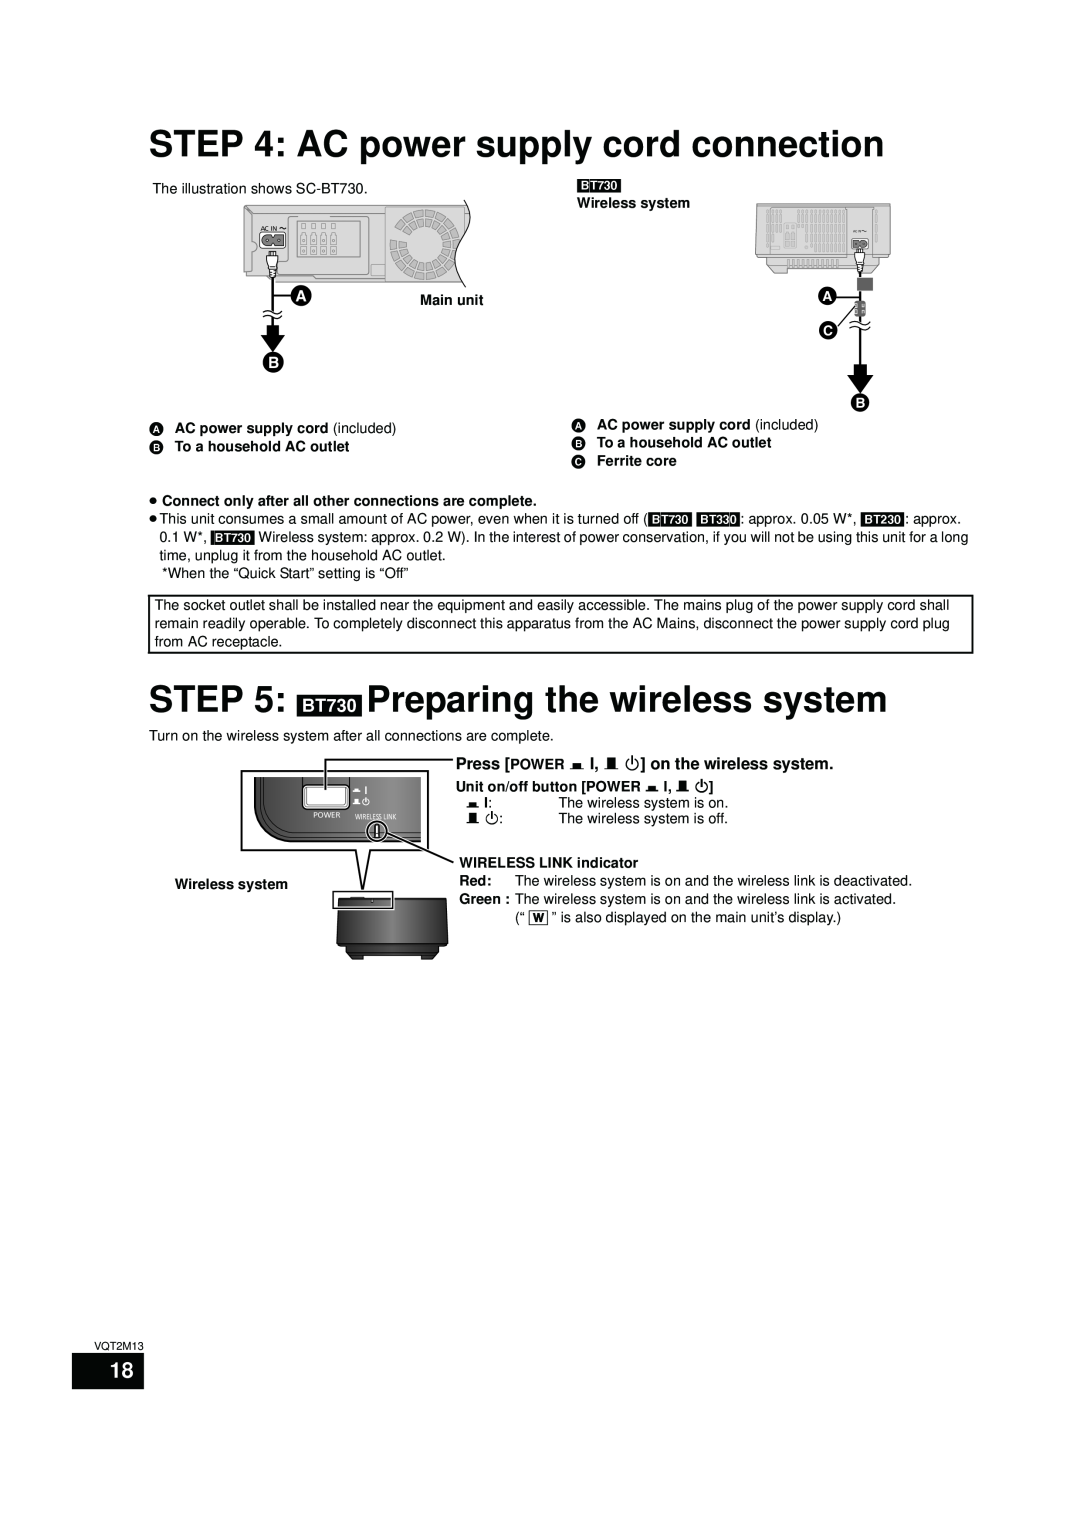 Panasonic SC-BT730, SC-BT330 operating instructions AC power supply cord connection, BT730 Preparing the wireless system 